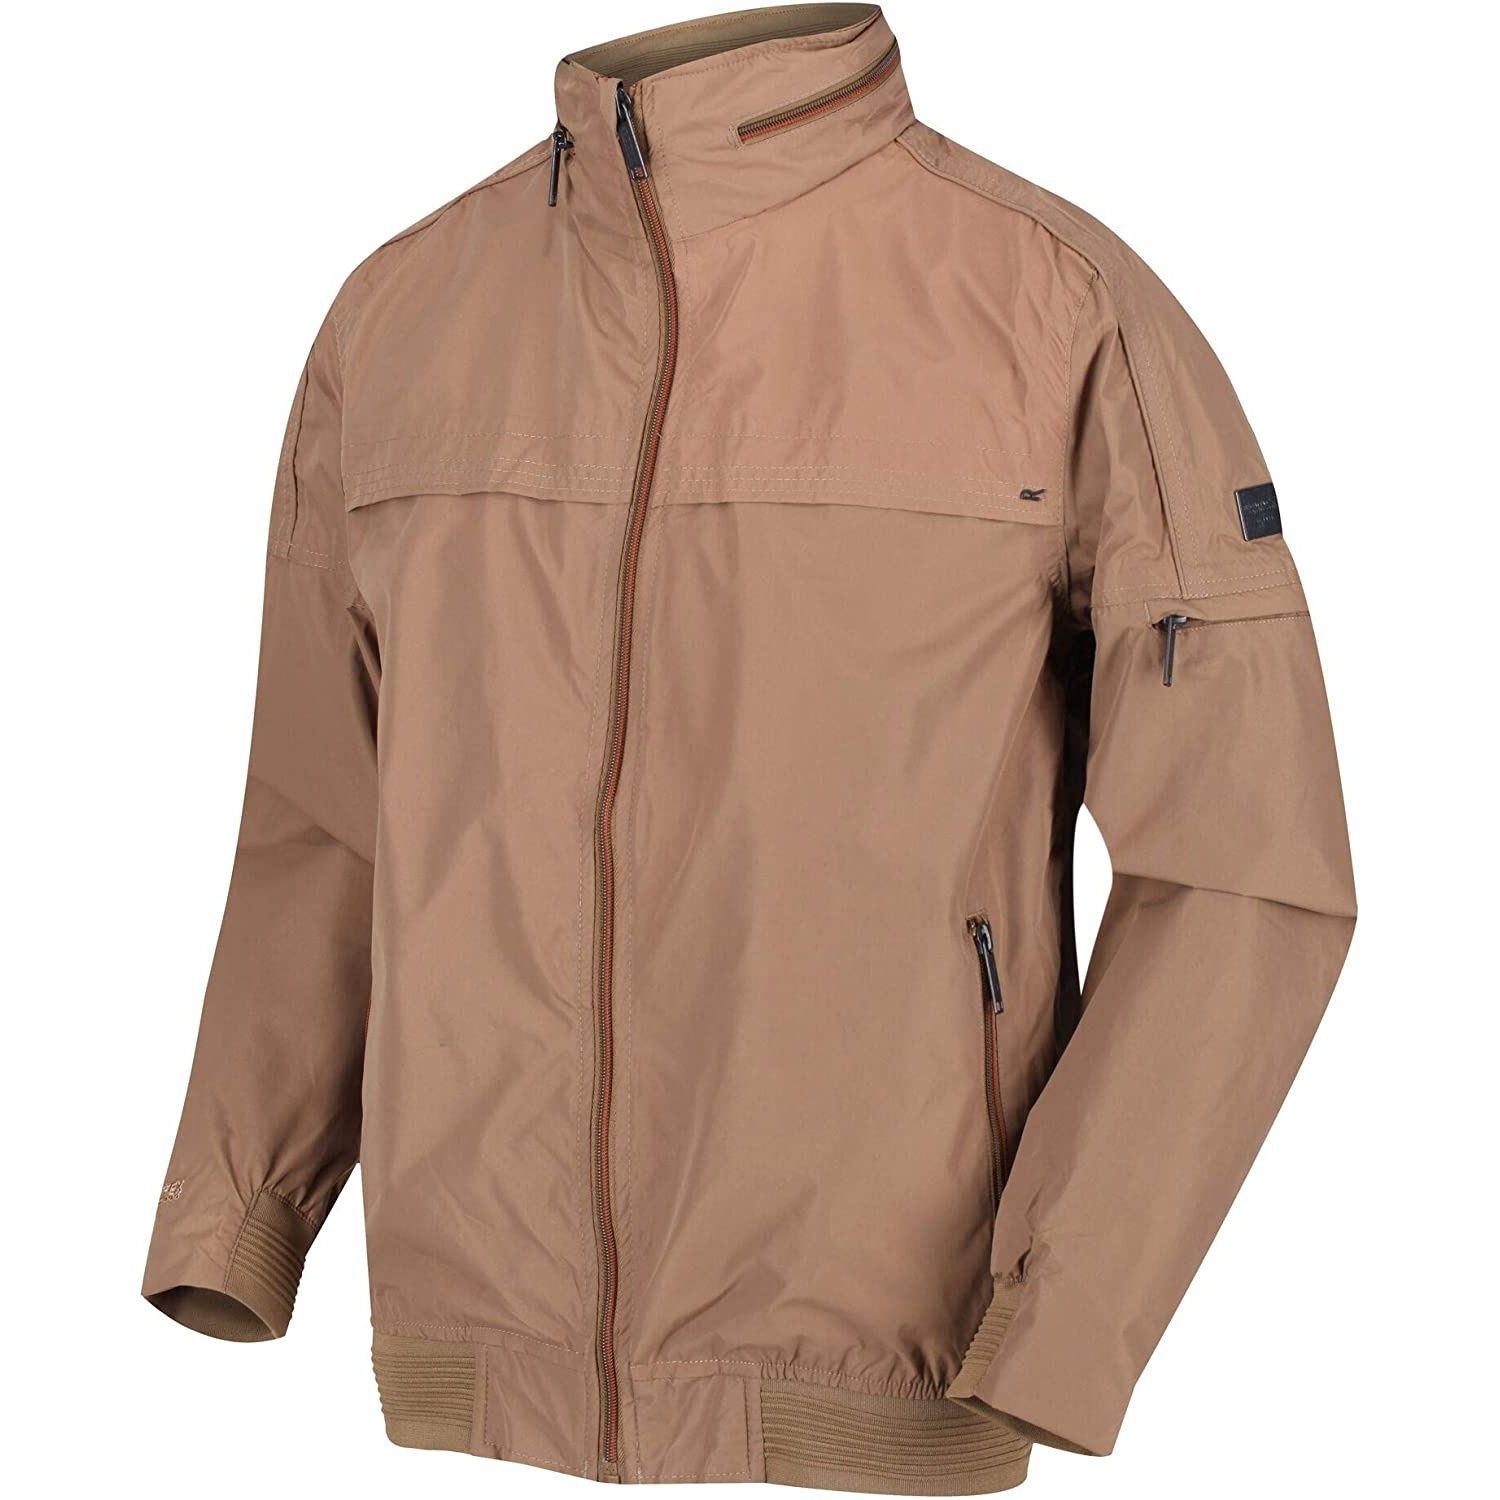 Waterproof and breathable polyester fabric. Durable water repellent finish. Taped seams. Internal security pocket. Lightweight concealed hood with adjusters. Ribbed inner collar, cuffs and hem. 2 zipped lower pockets. Size/Chest (ins) S-37-38 inches, M-39-40 inches, L-41-42 inches, XL-43-44 inches, 2XL-46-48 inches, 3XL-49-51 inches.